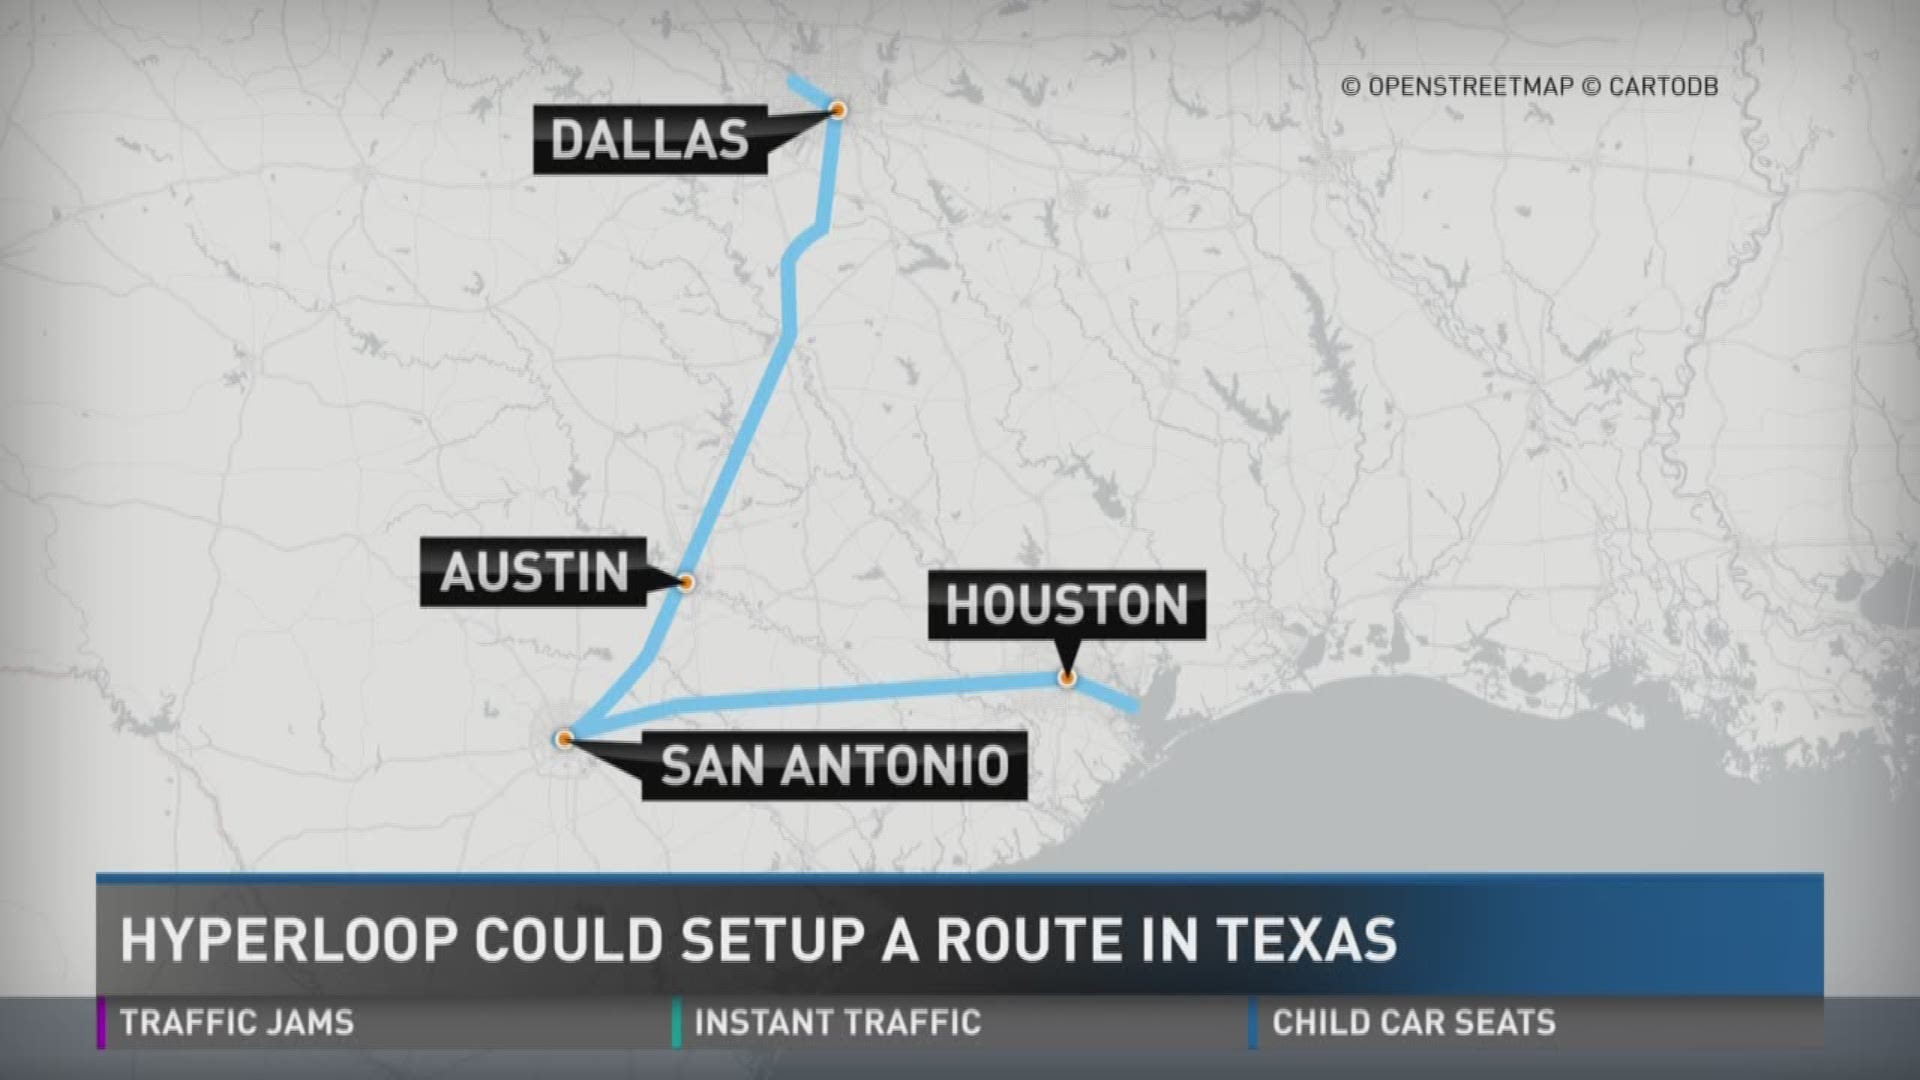 The proposed Texas route would start at DFW Airport and connect Dallas, Fort Worth, Austin, San Antonio, Houston, and Laredo.